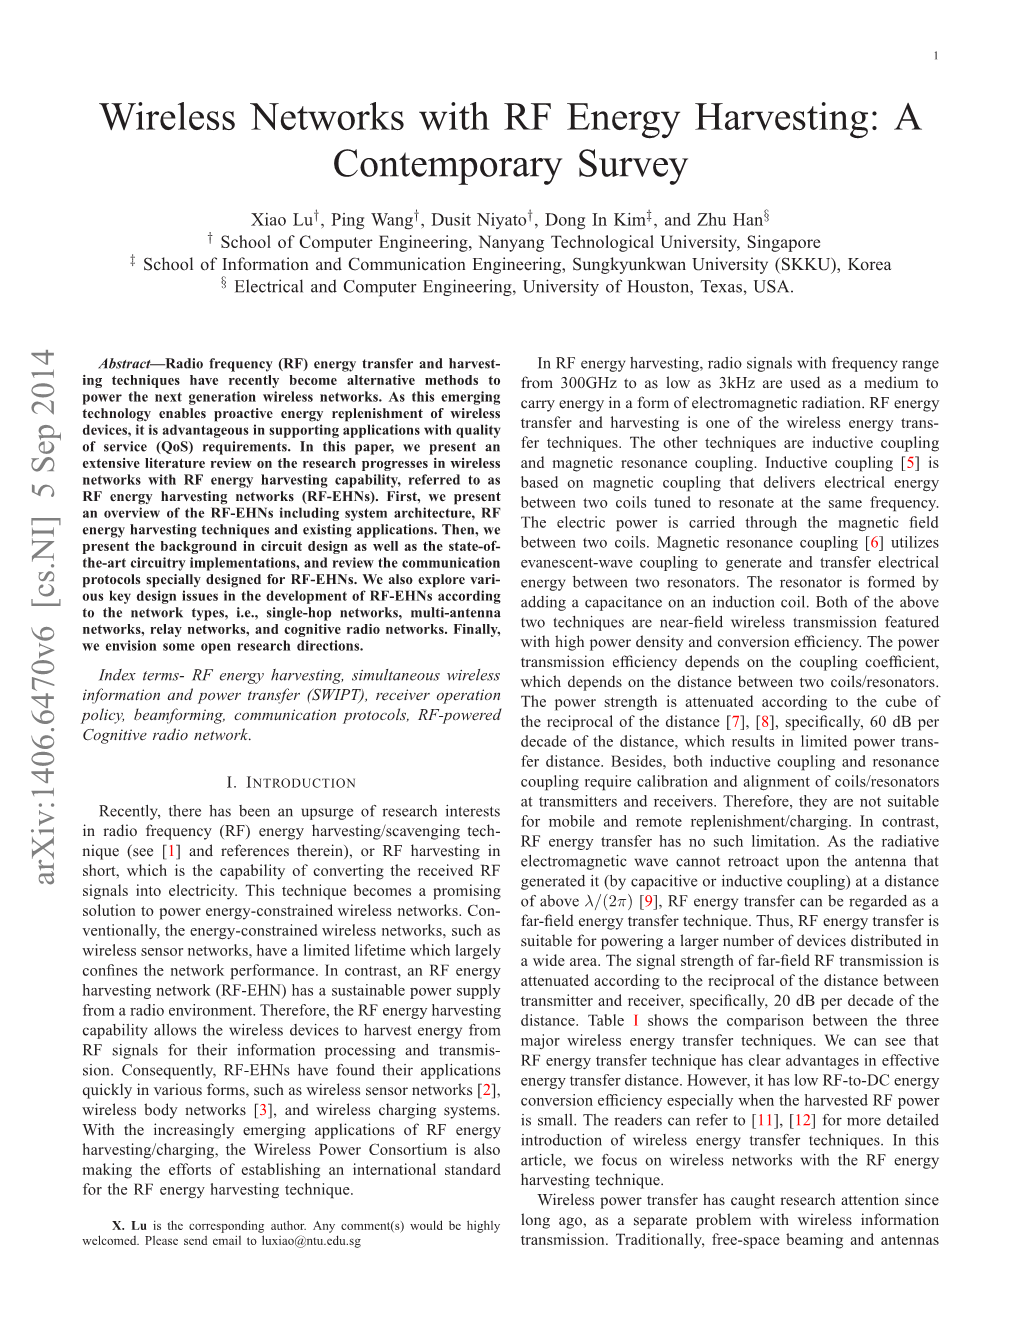 Wireless Networks with RF Energy Harvesting: a Contemporary Survey